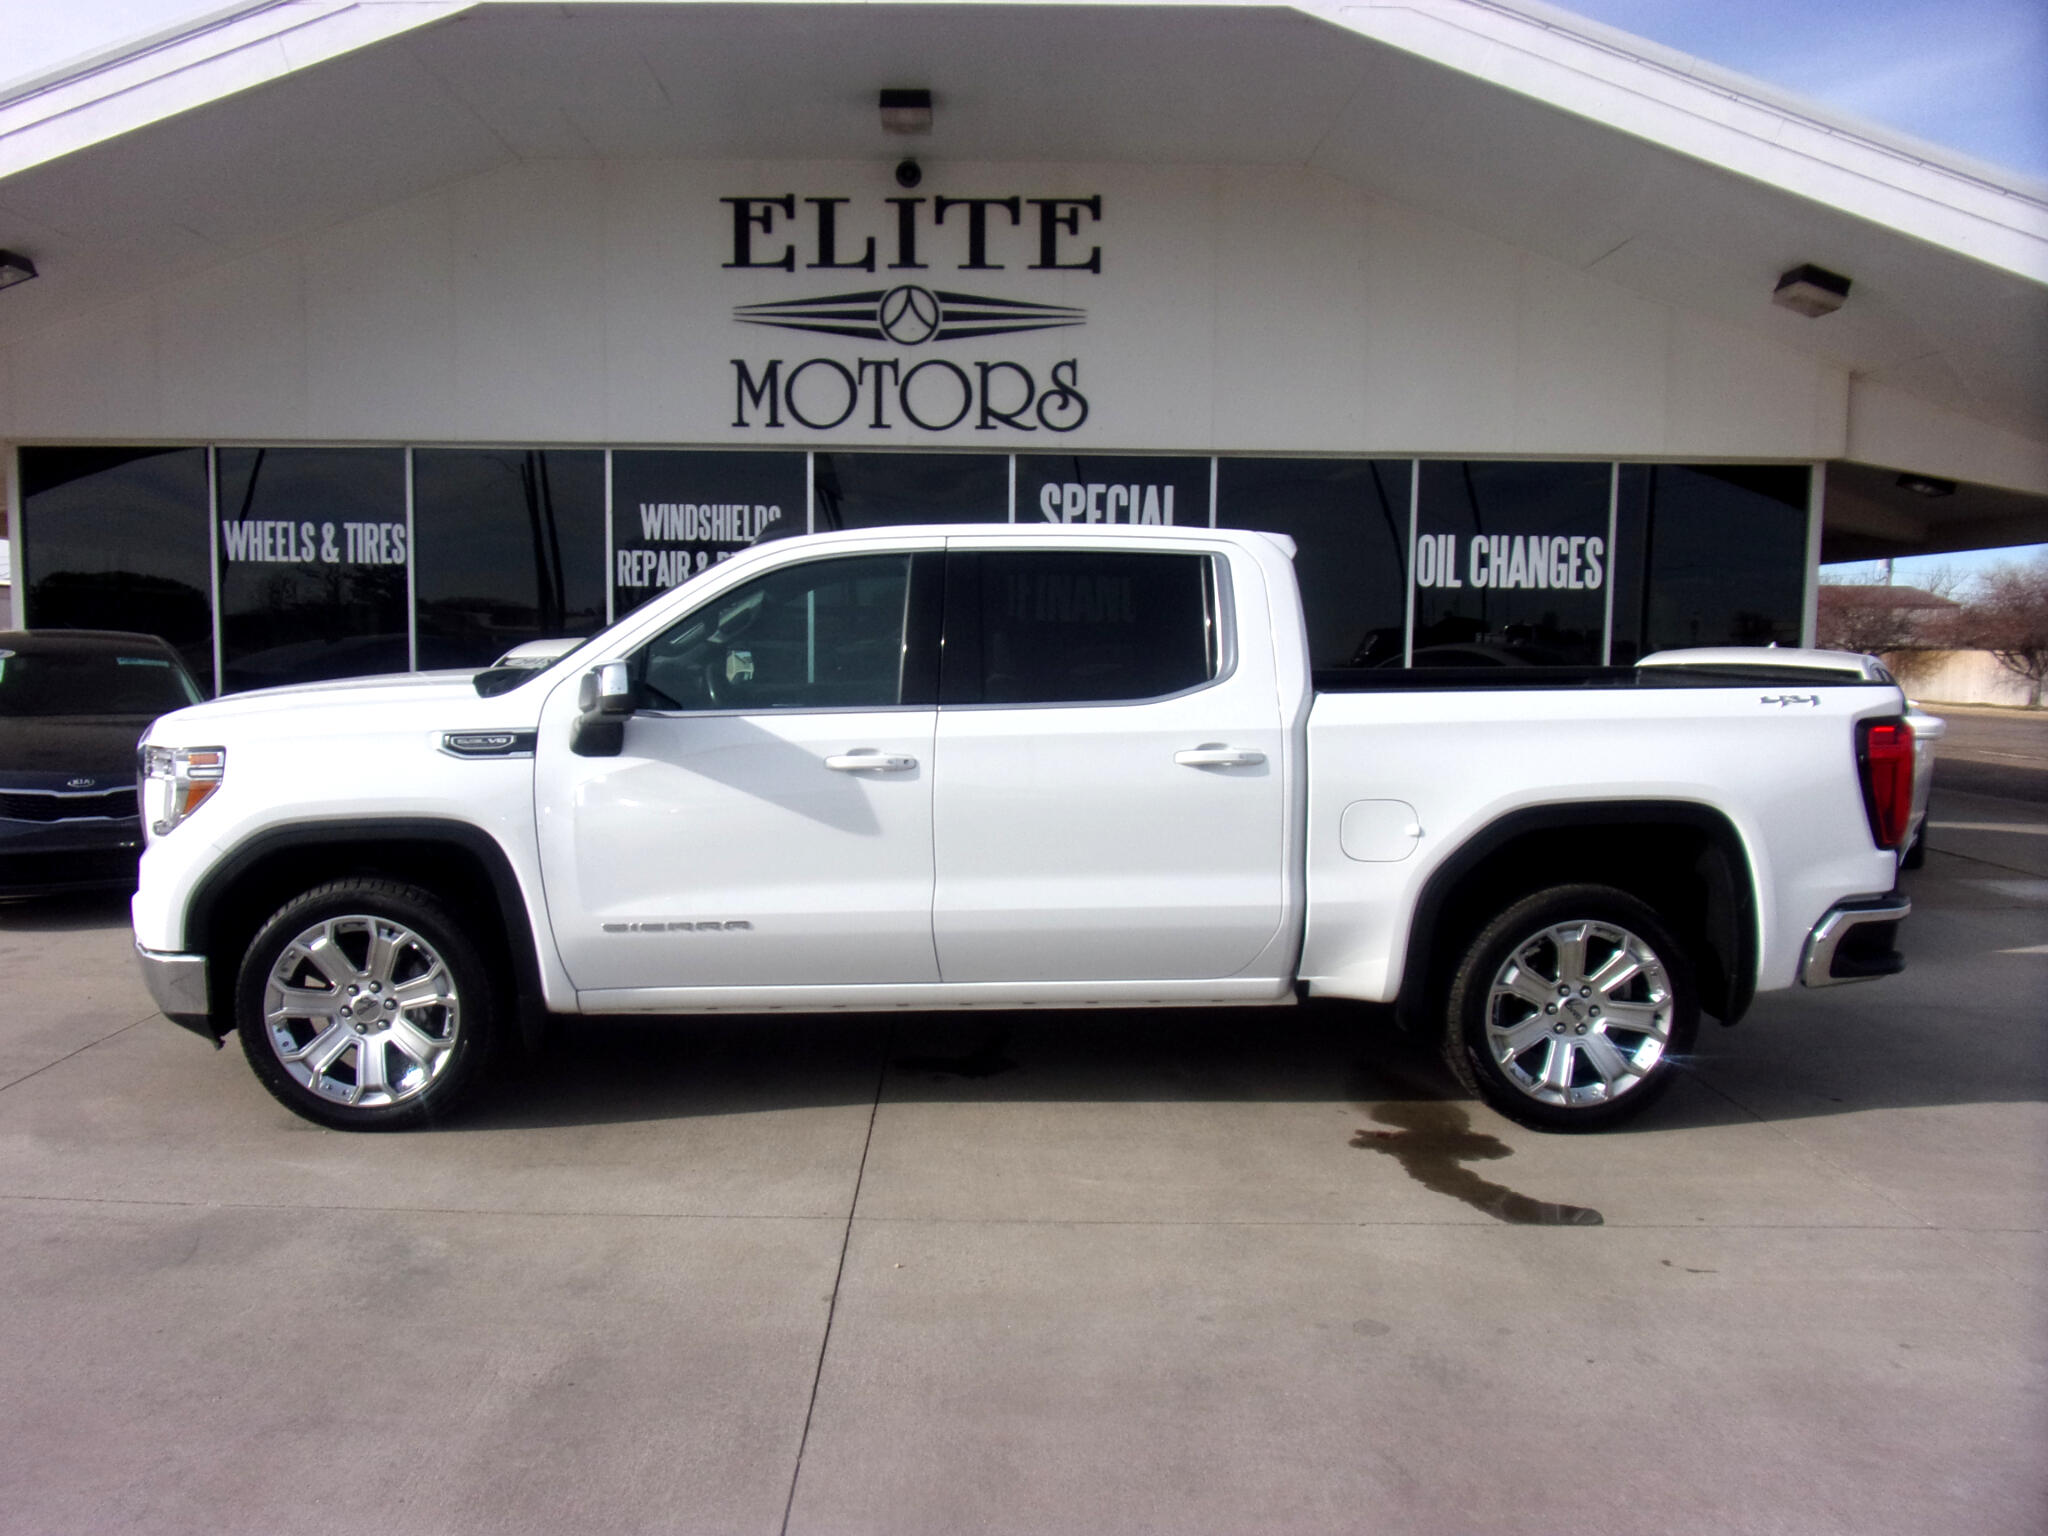 Used 2020 Gmc Sierra 1500 Sle Crew Cab 4wd For Sale In Liberal Ks 67901